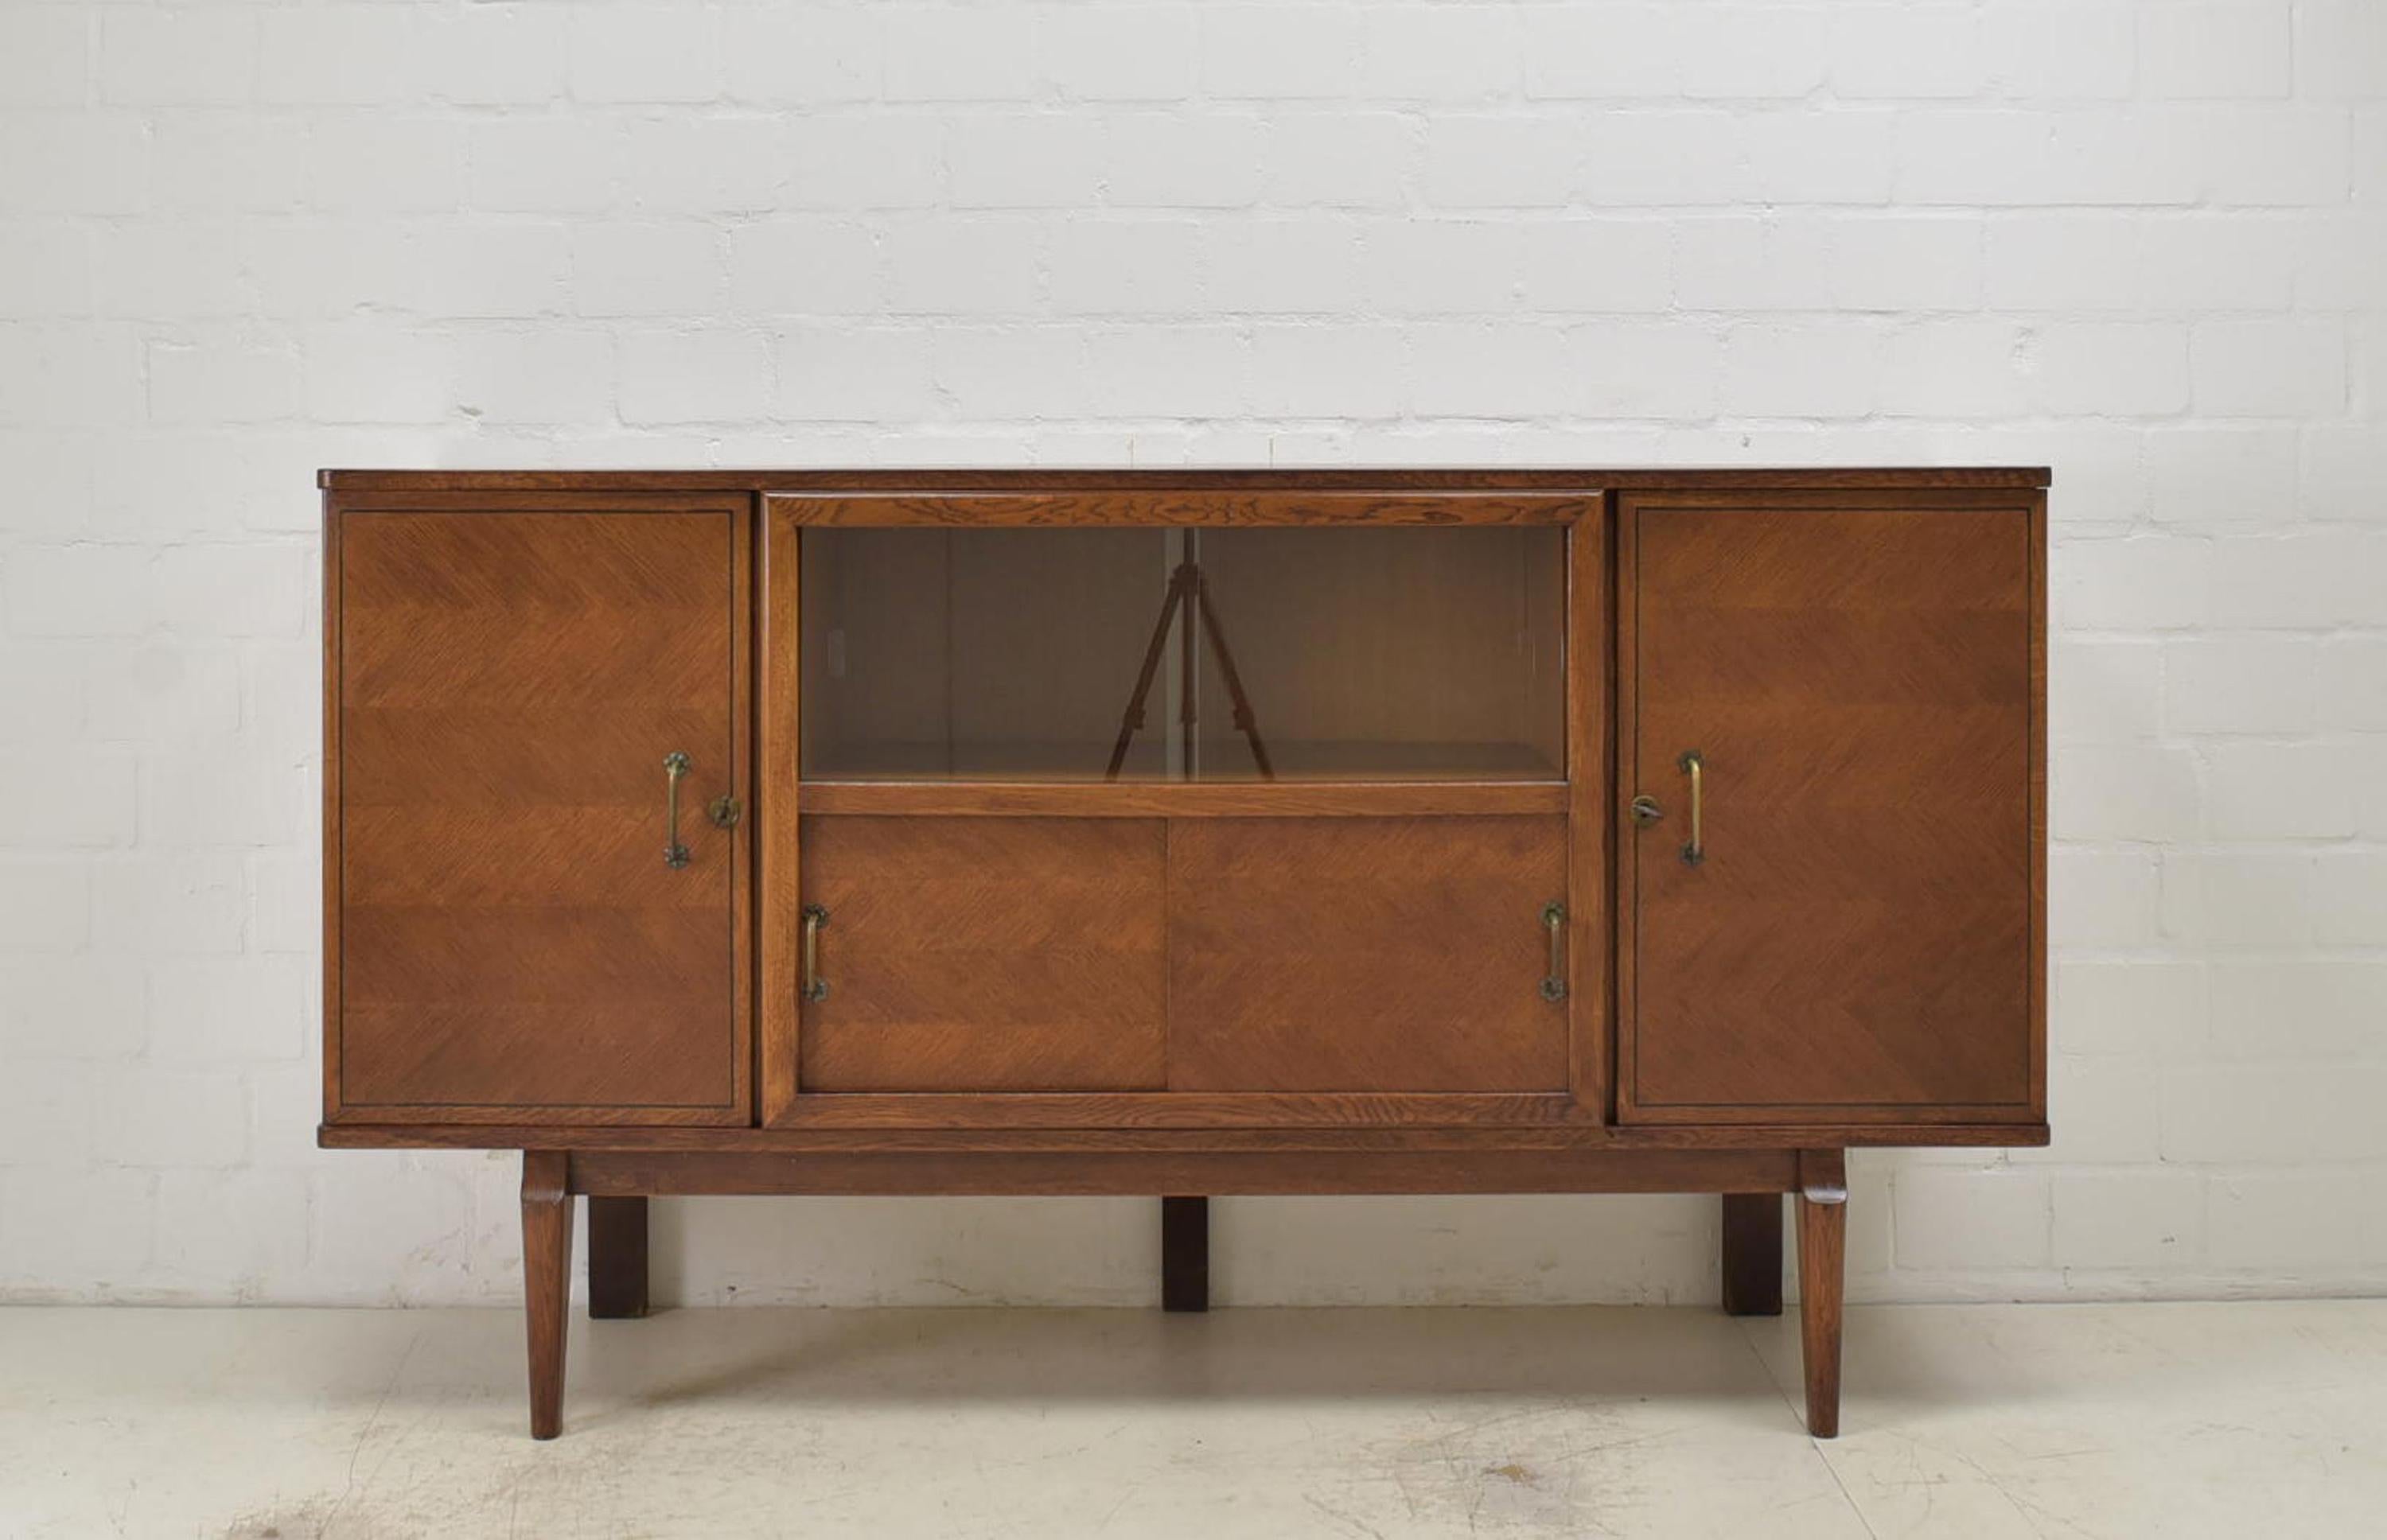 Showcase sideboard restored Art Deco midcentury around 1950 vintage oak

Features:
Two-door model with two sliding door compartments
One shelf each on the left and right, one with a drawer underneath
Very high quality processing
Shelves with